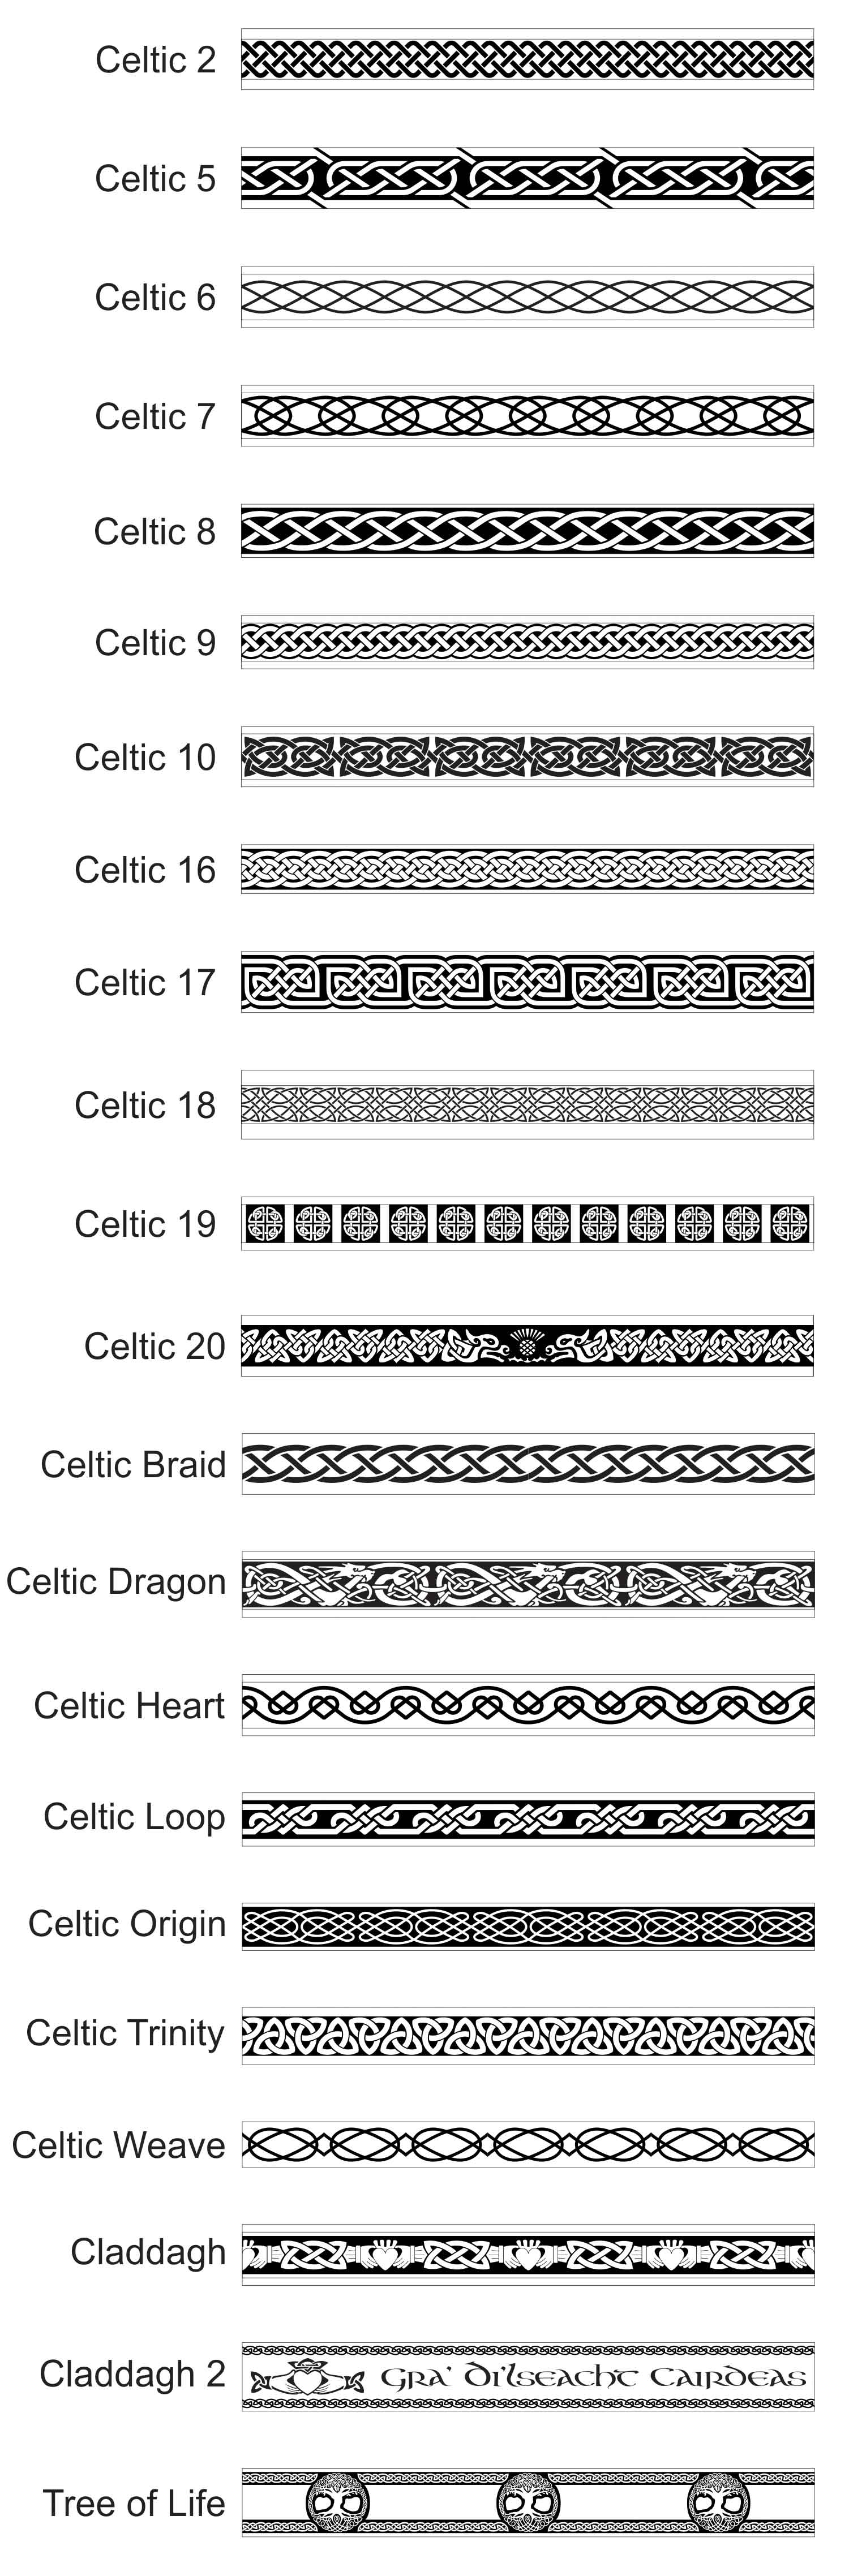 Available Celtic Patterns